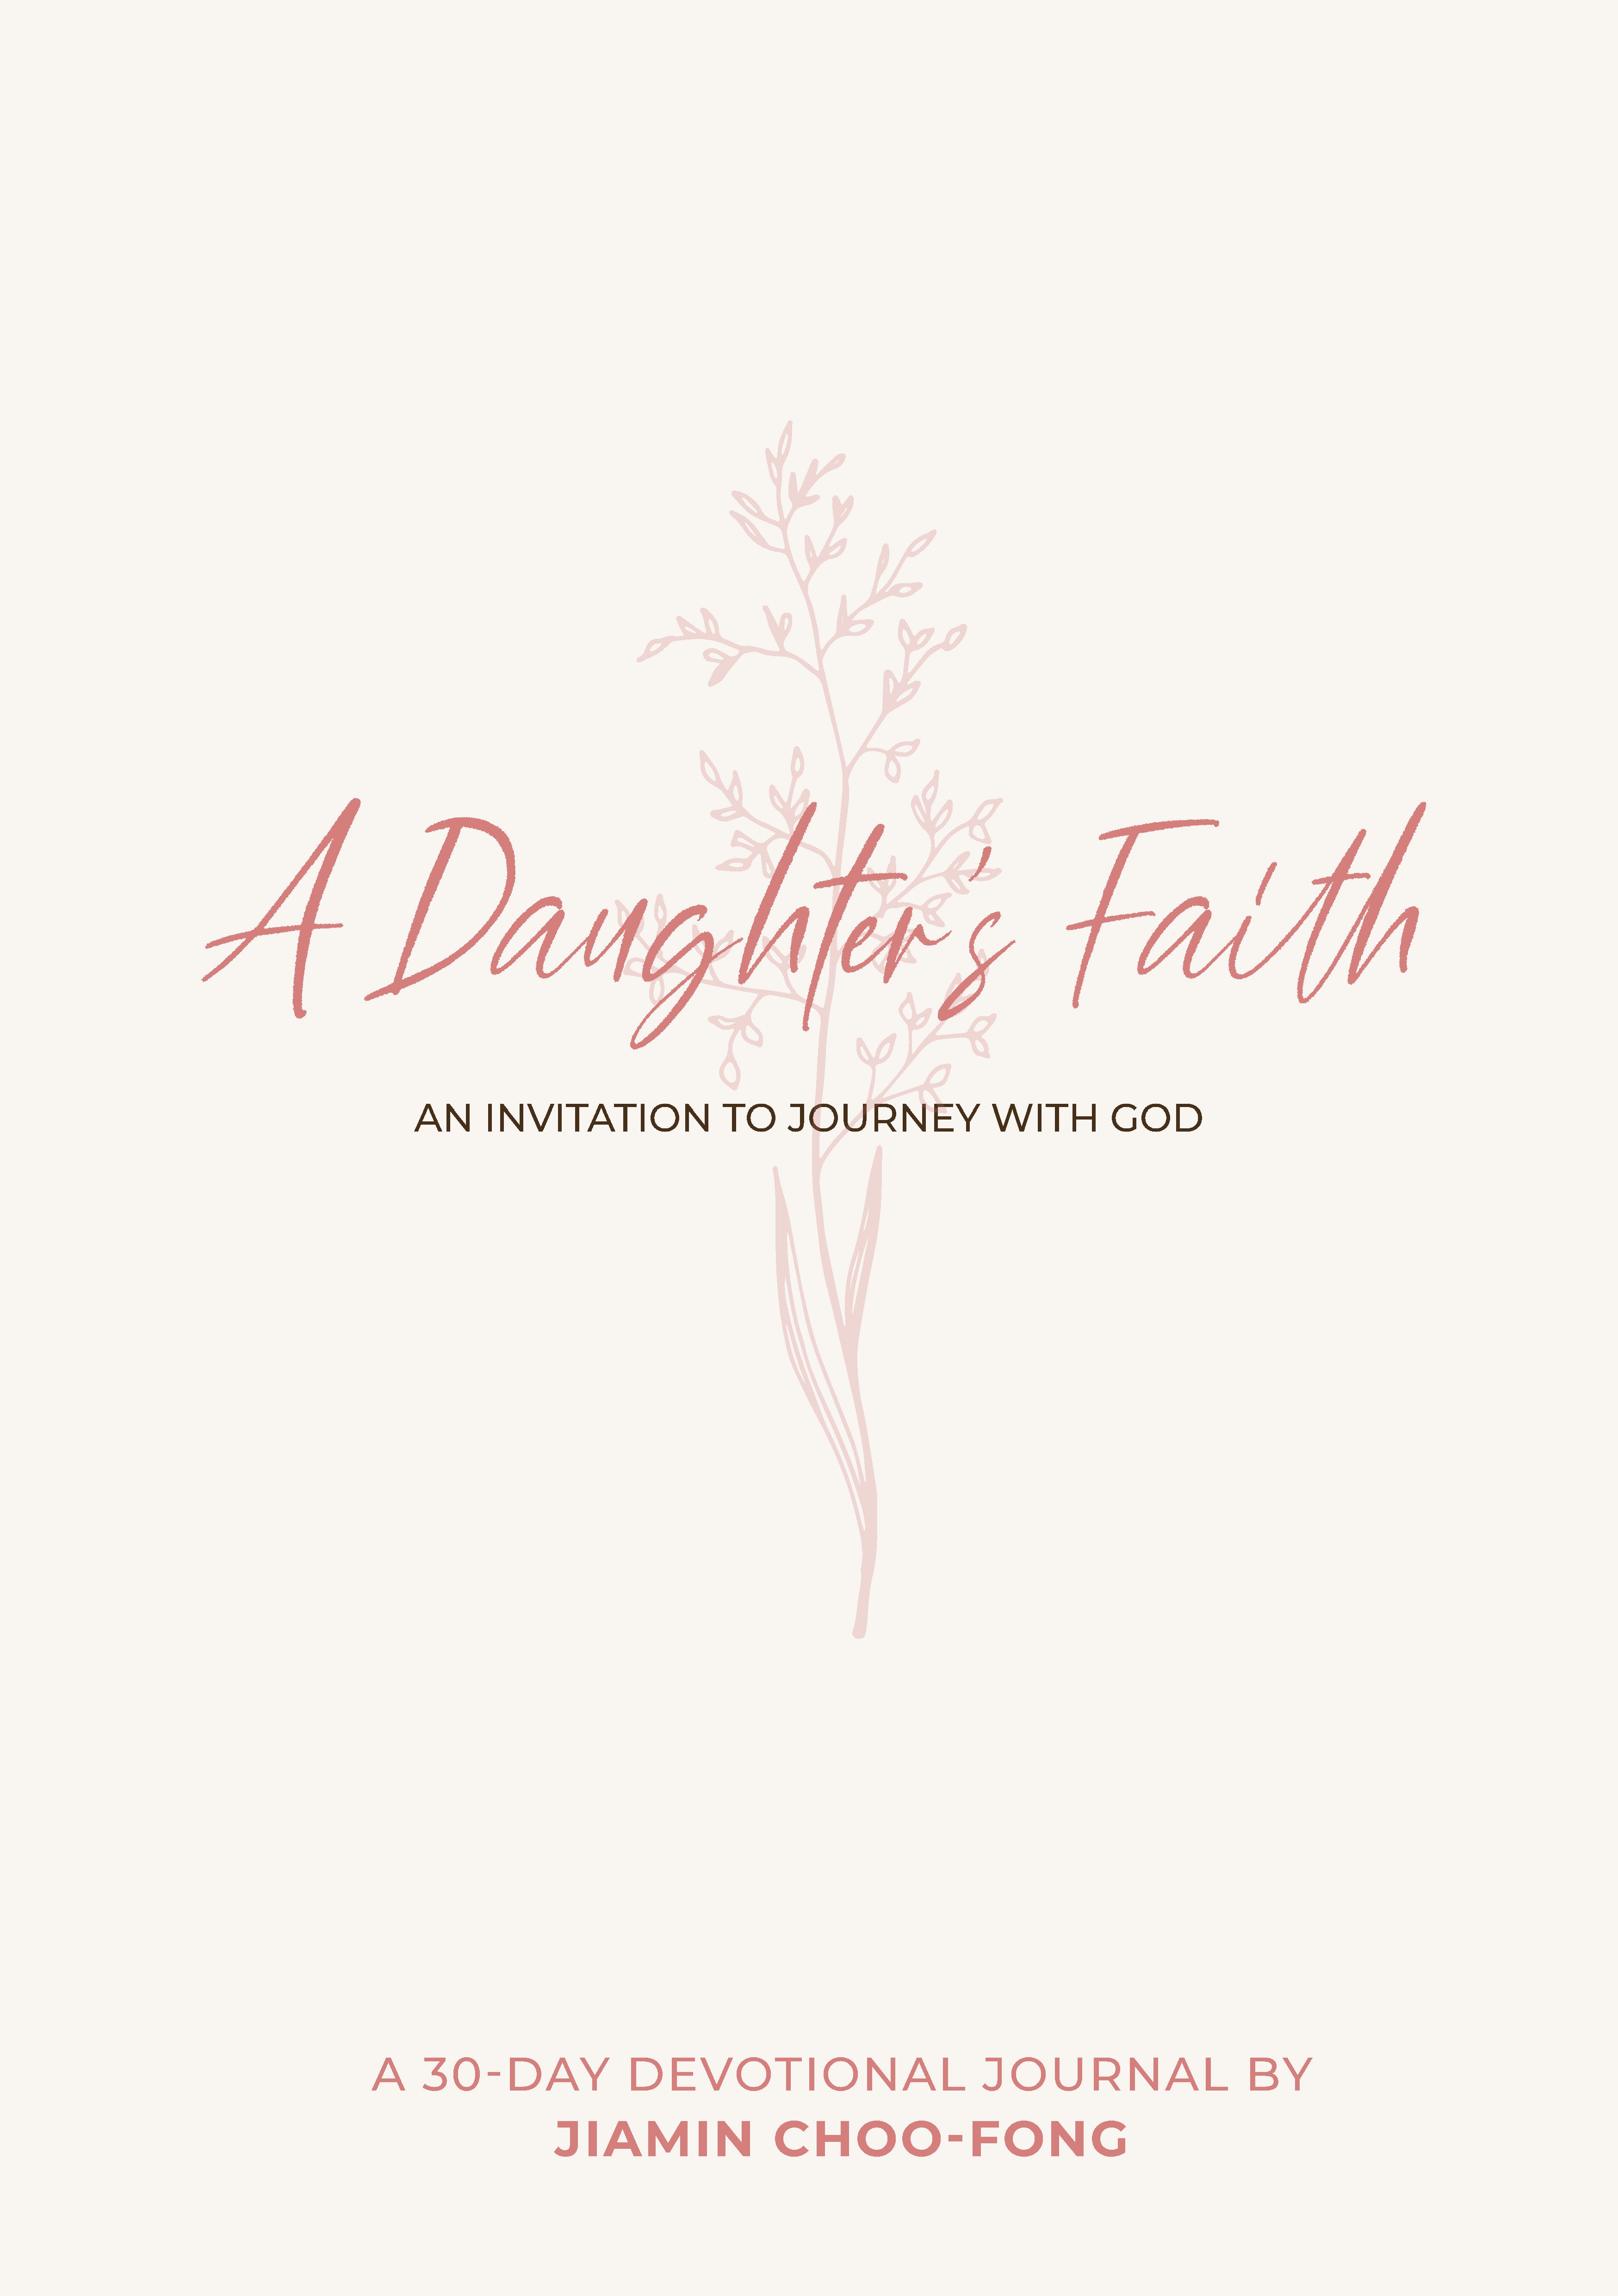 A Daughter's Faith: An Invitation to Journey with God